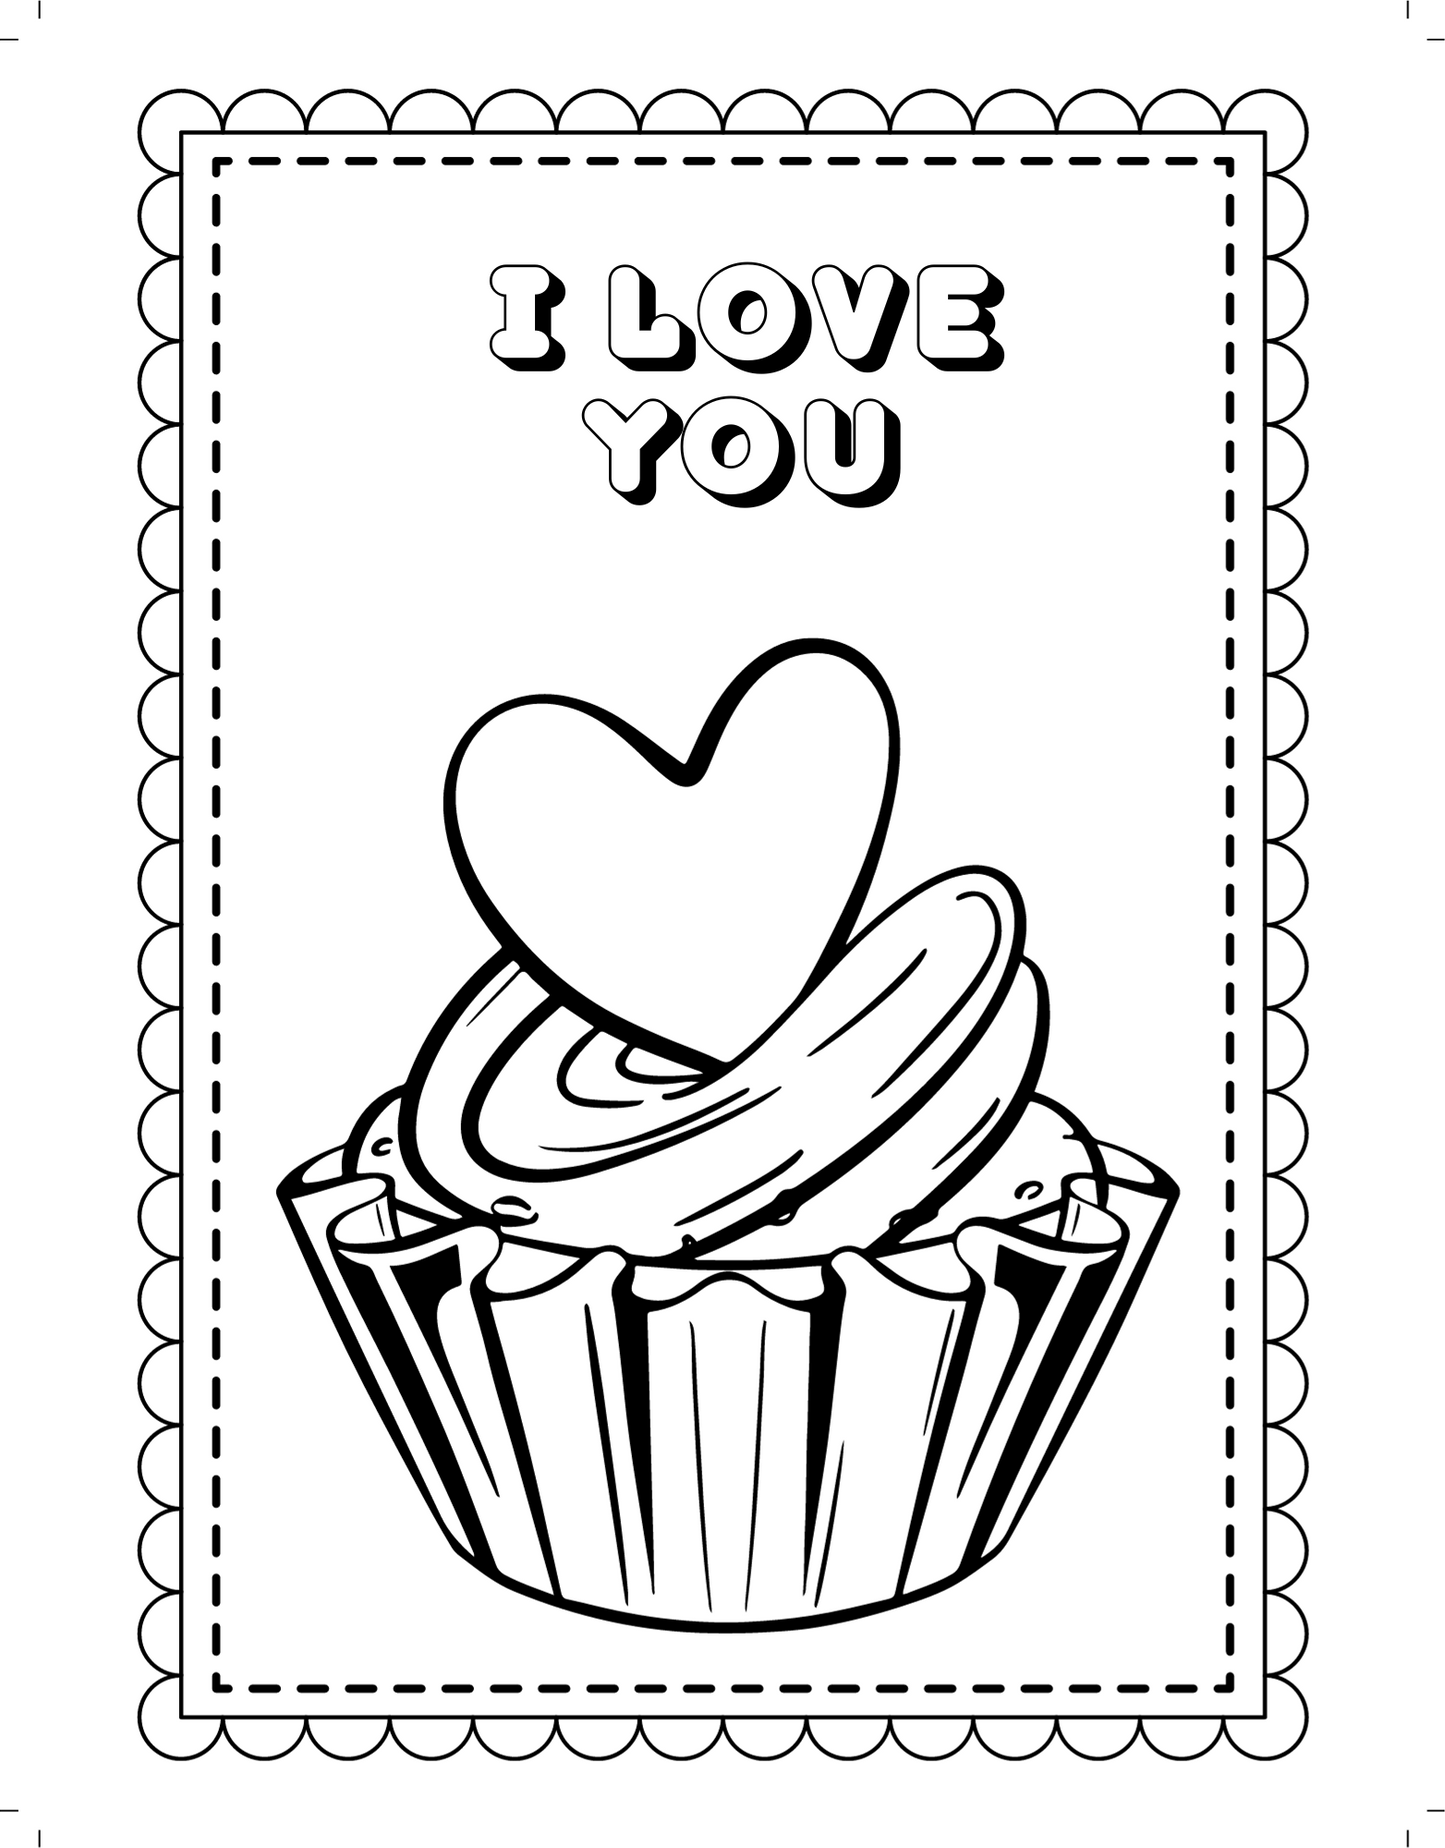 Free Coloring Page